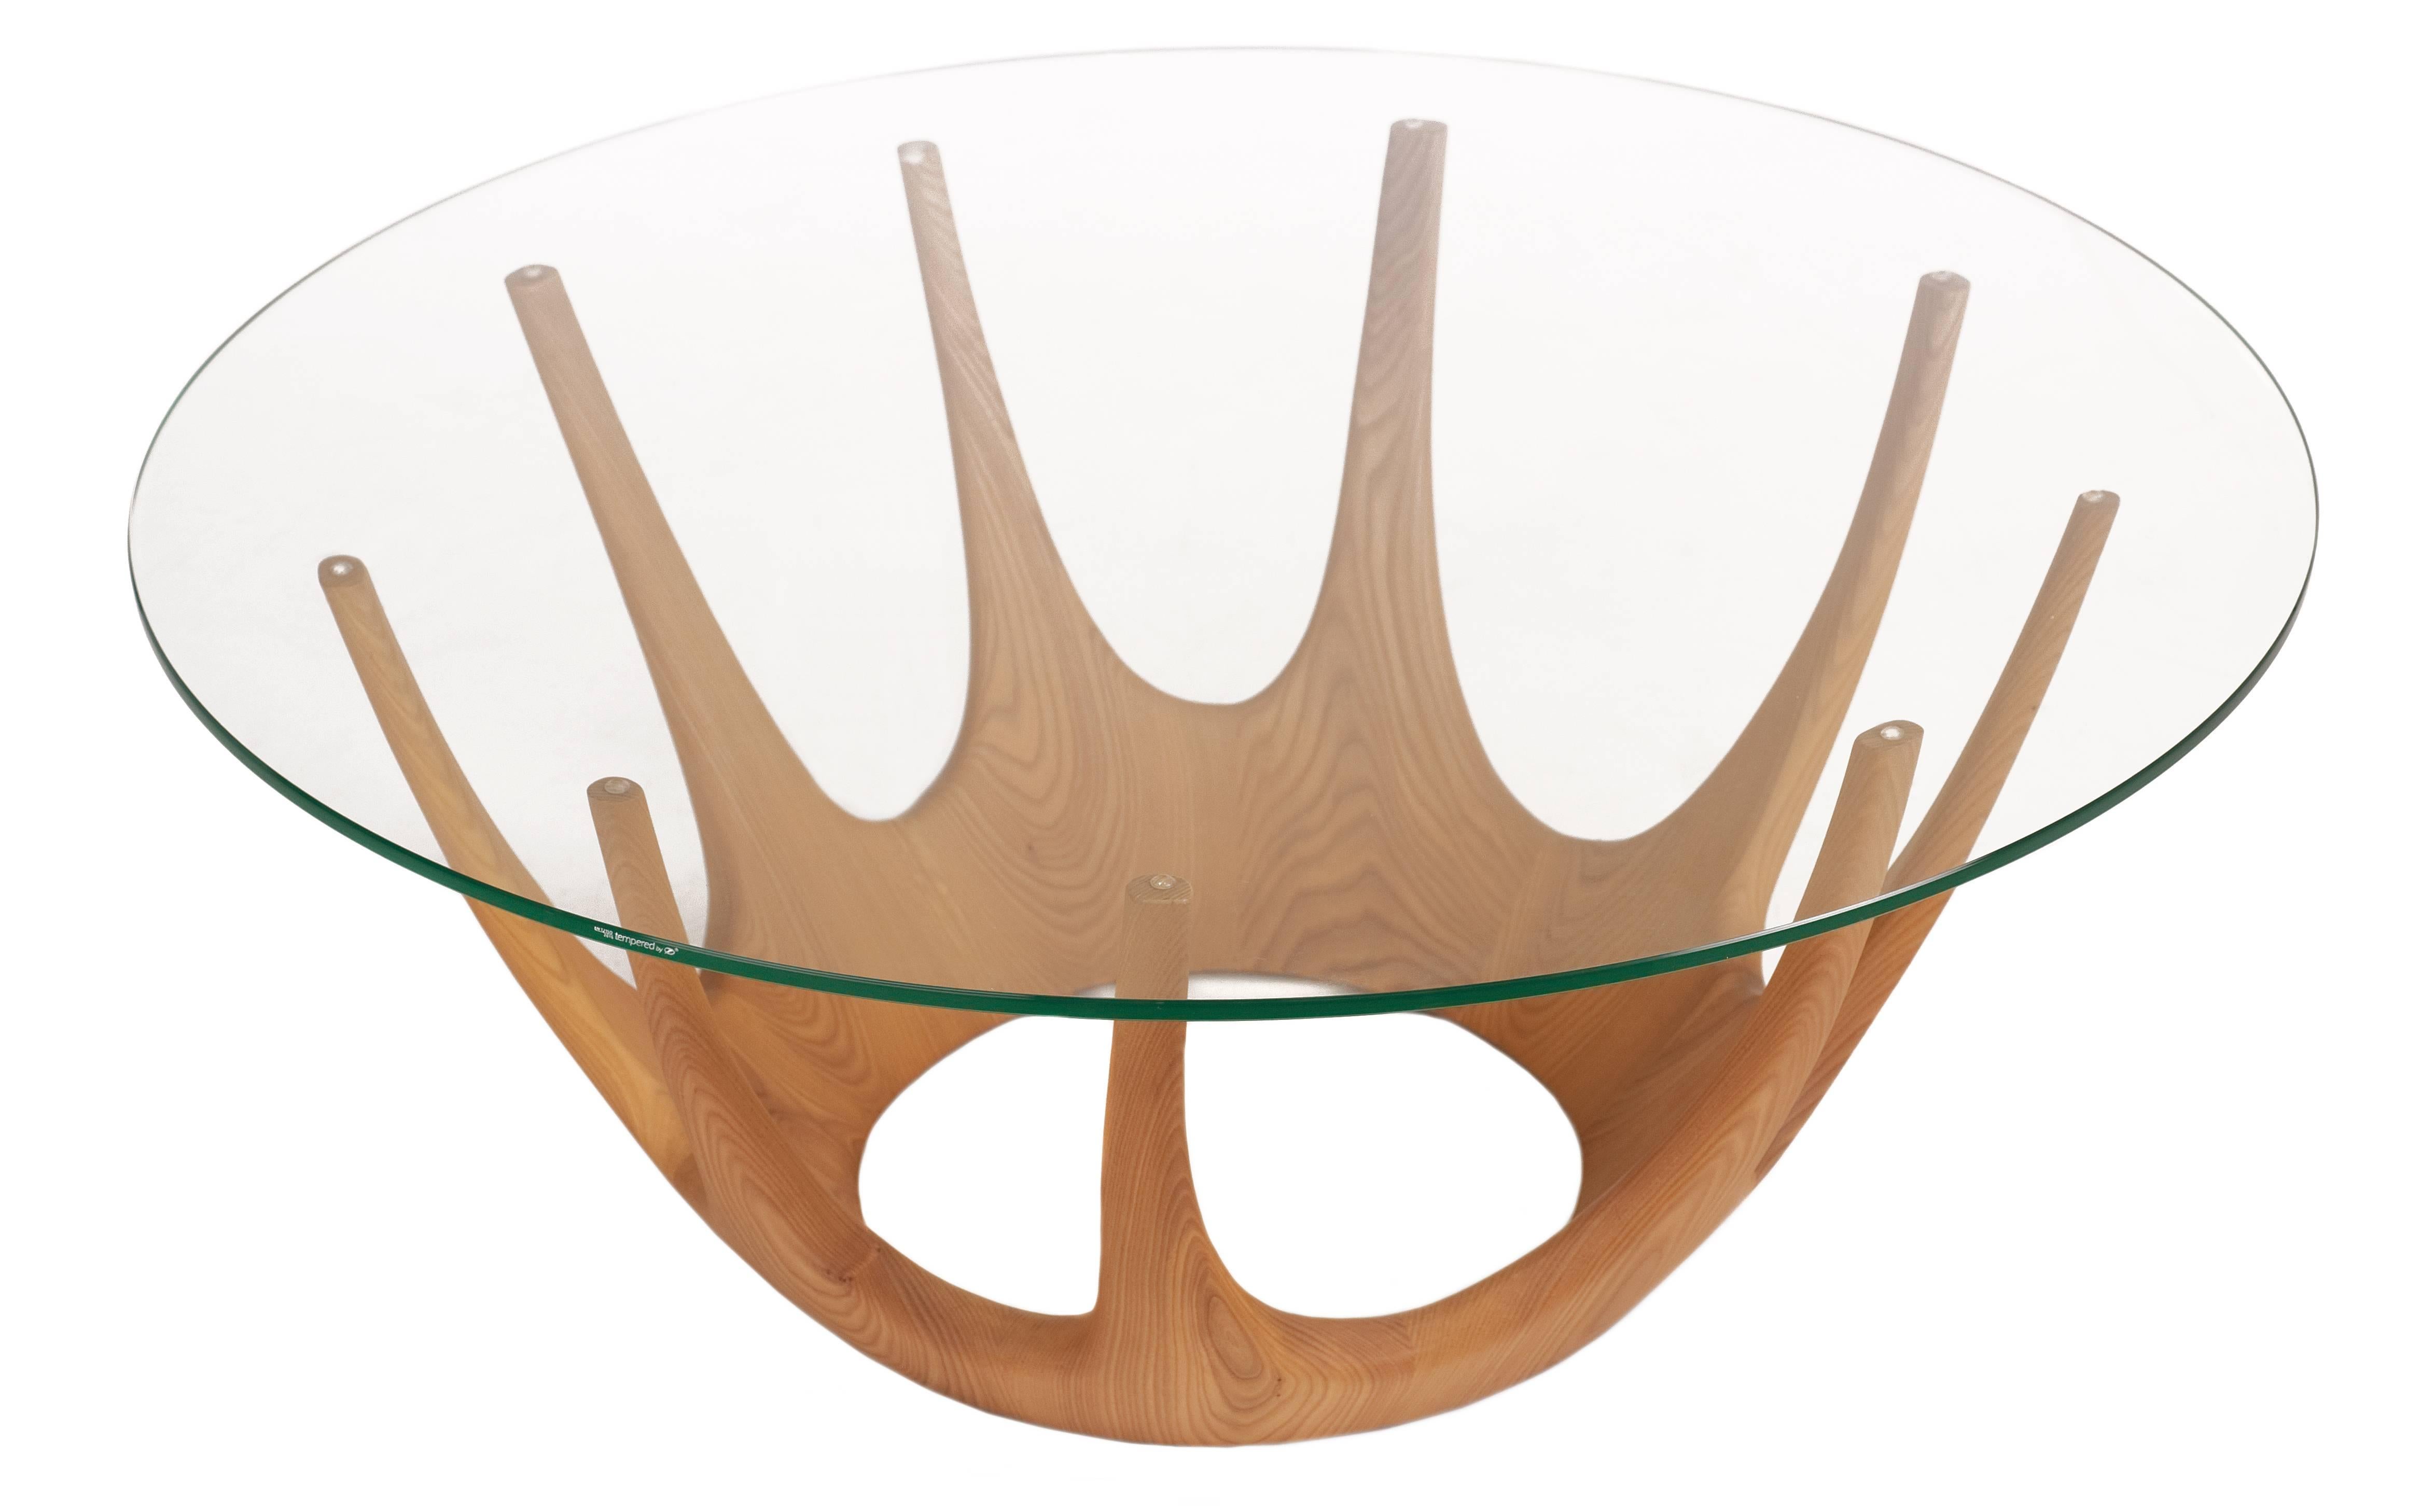 The crown table, as its name suggests, is the personification of a crown. Complex in structure and handmade from beautiful solid ash with tempered glass, it is both robust and incredibly elegant.